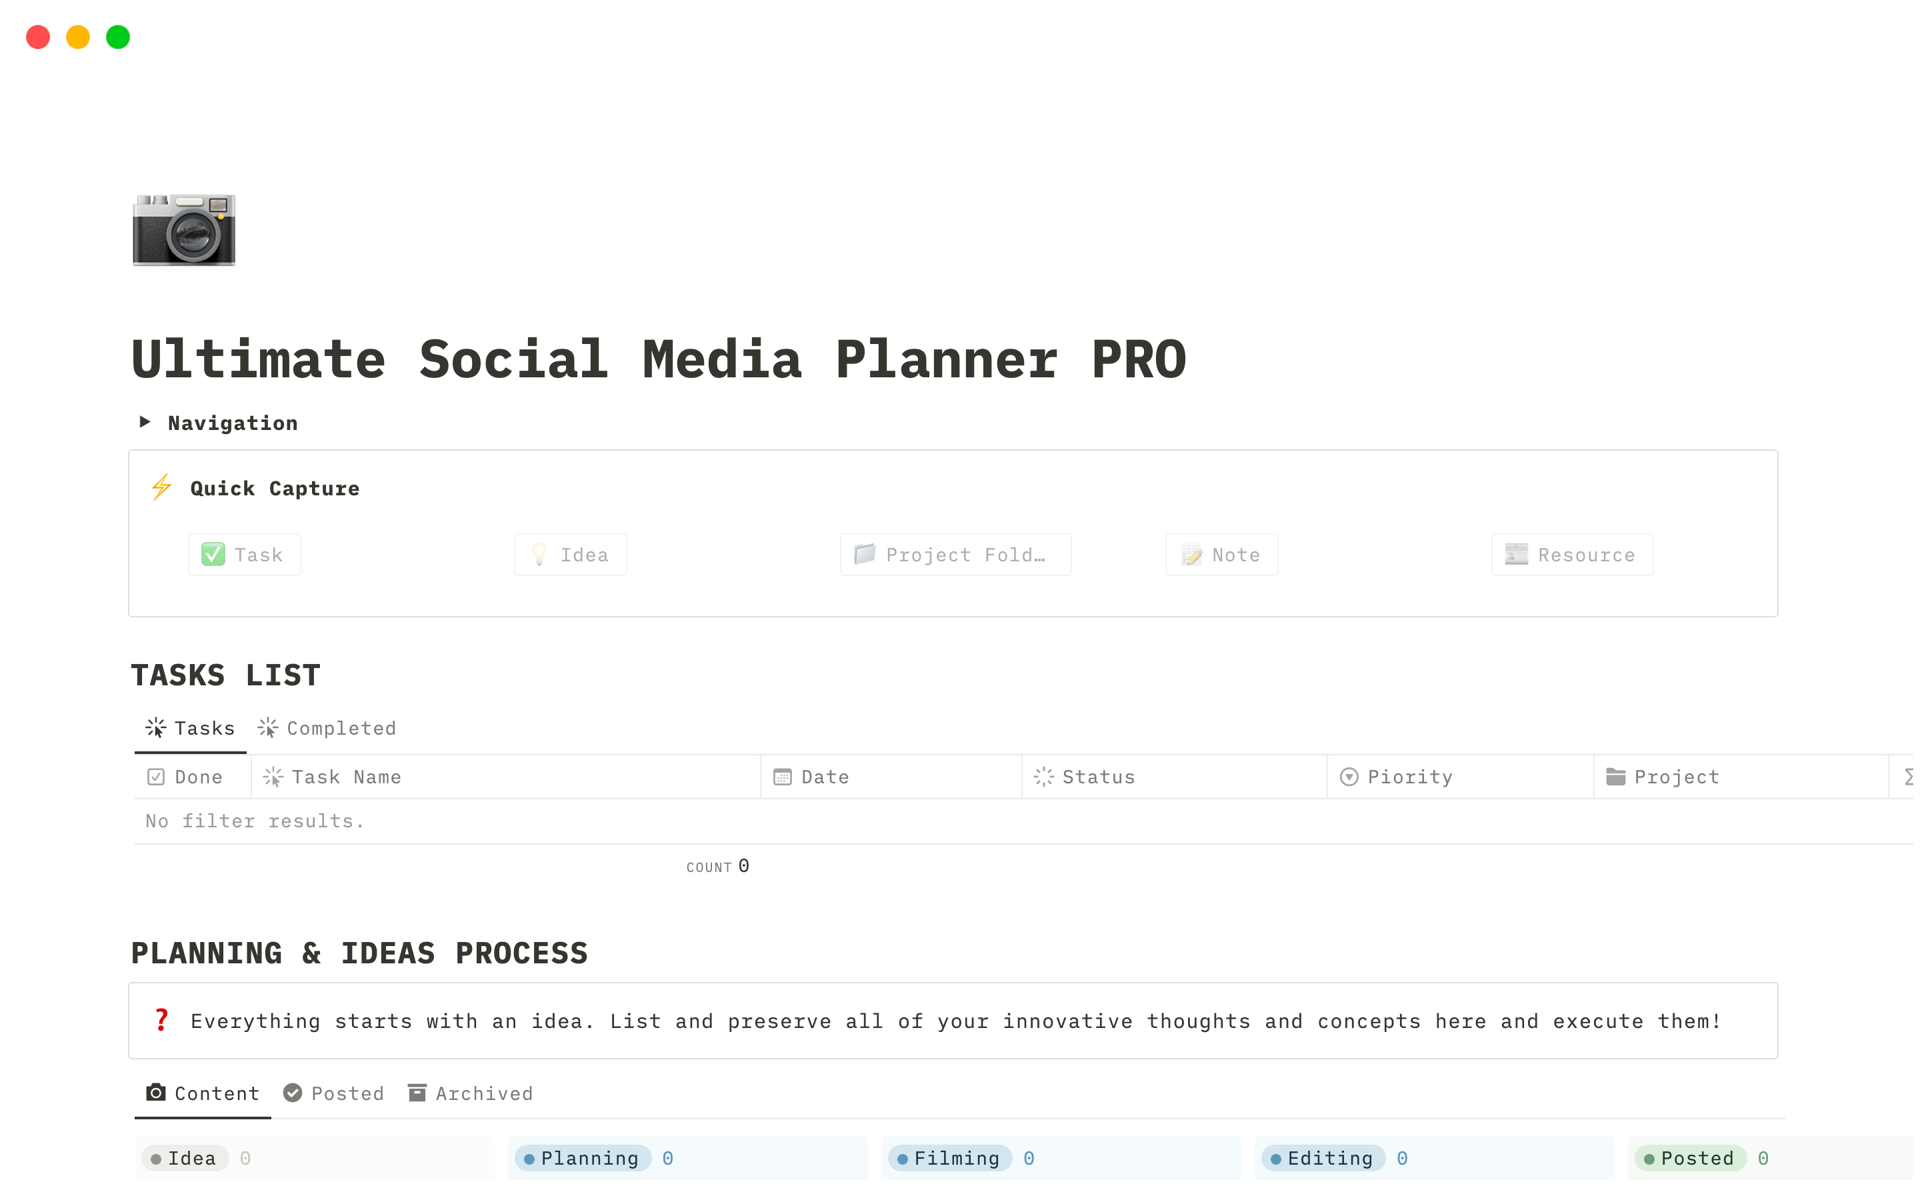 Designed to help you plan your social media content in one place.